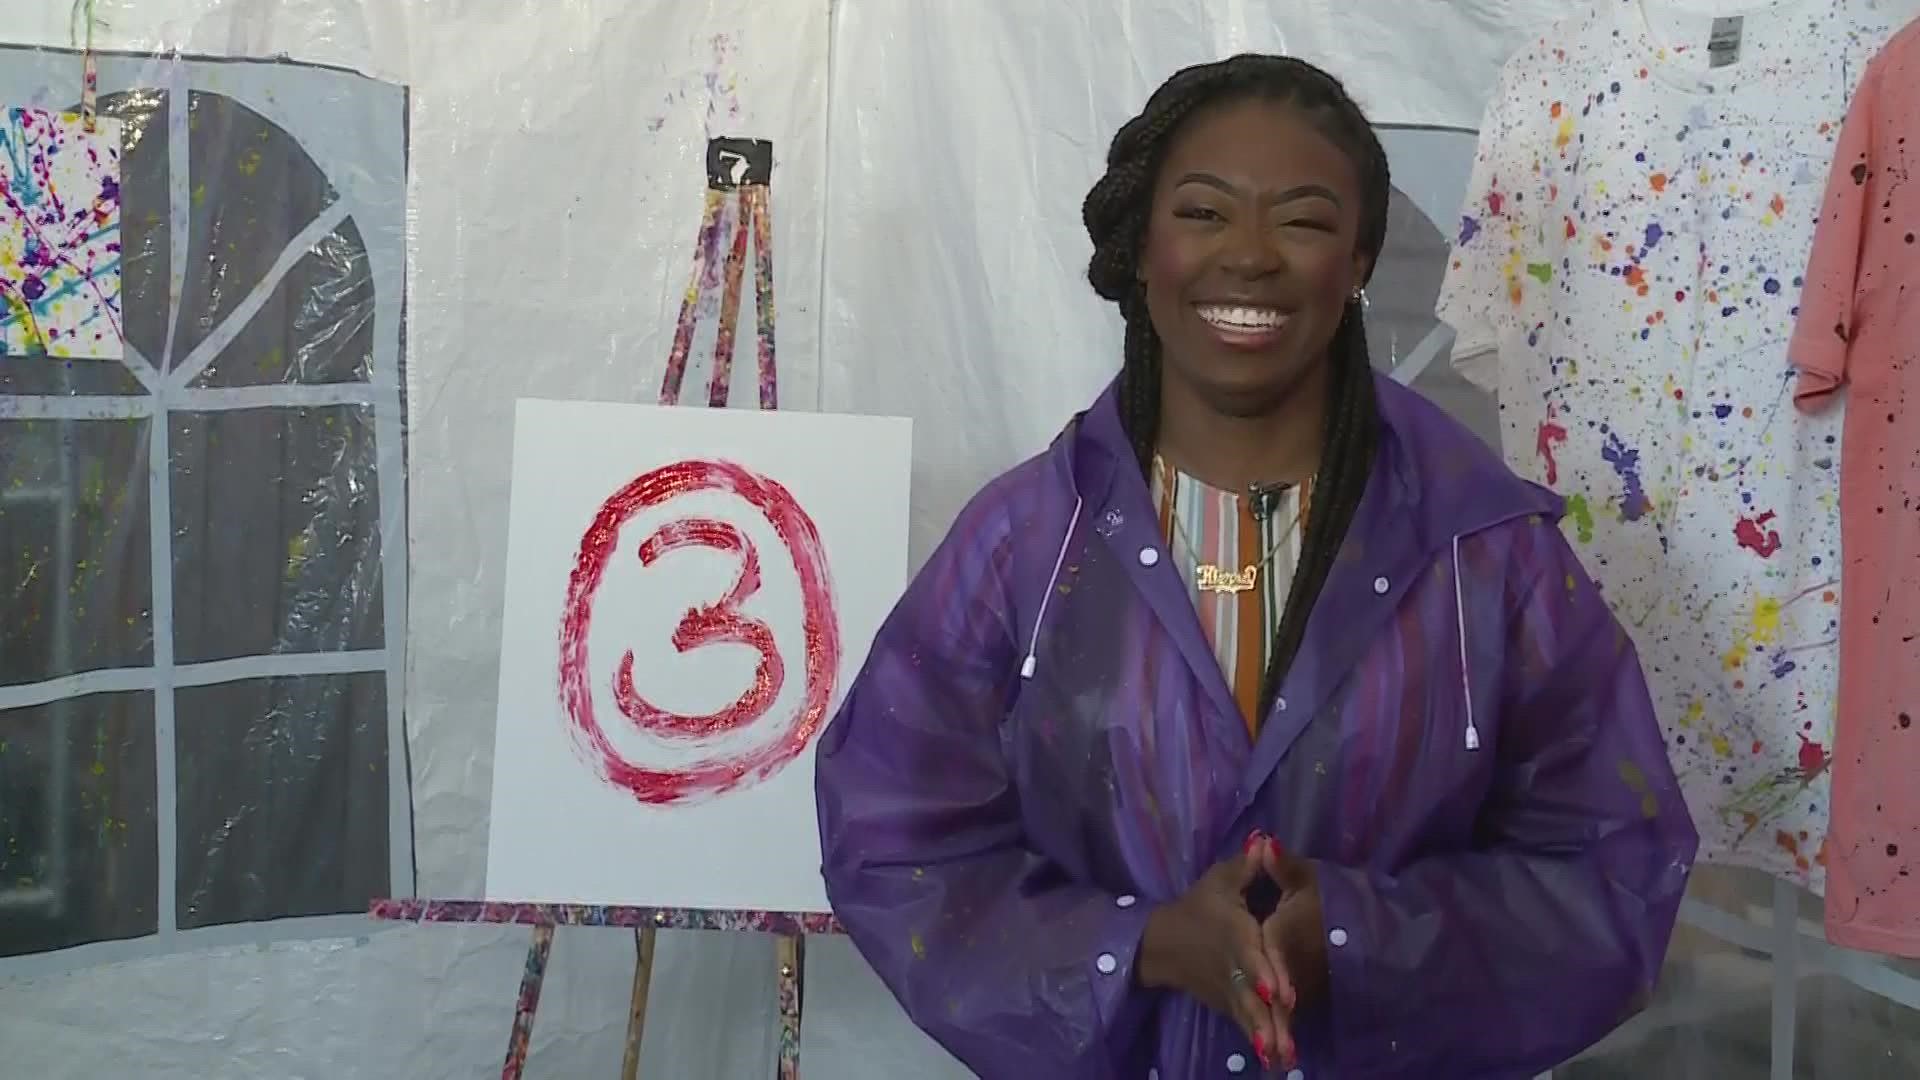 3News' Kierra Cotton visited the festival and tried something new